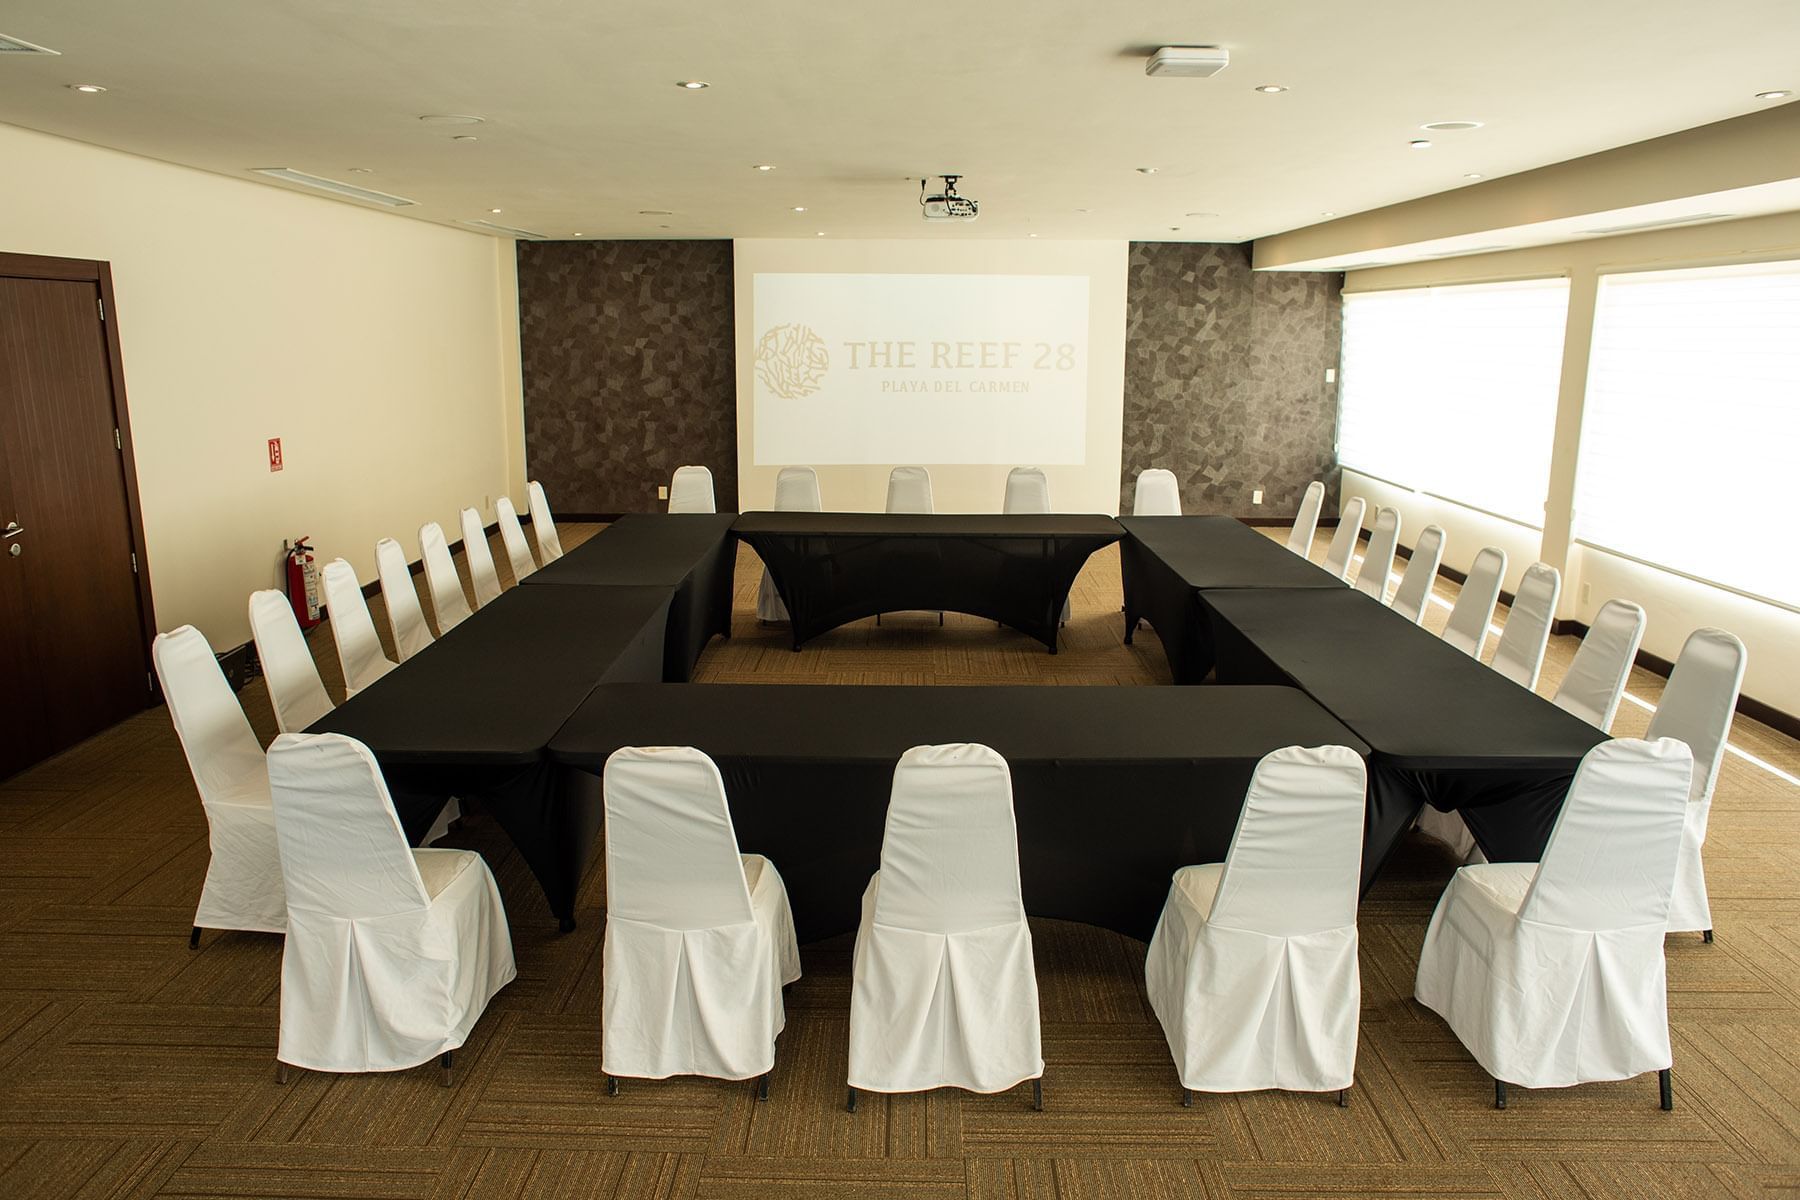 Conference setup in meeting room at The Reef Coco Beach